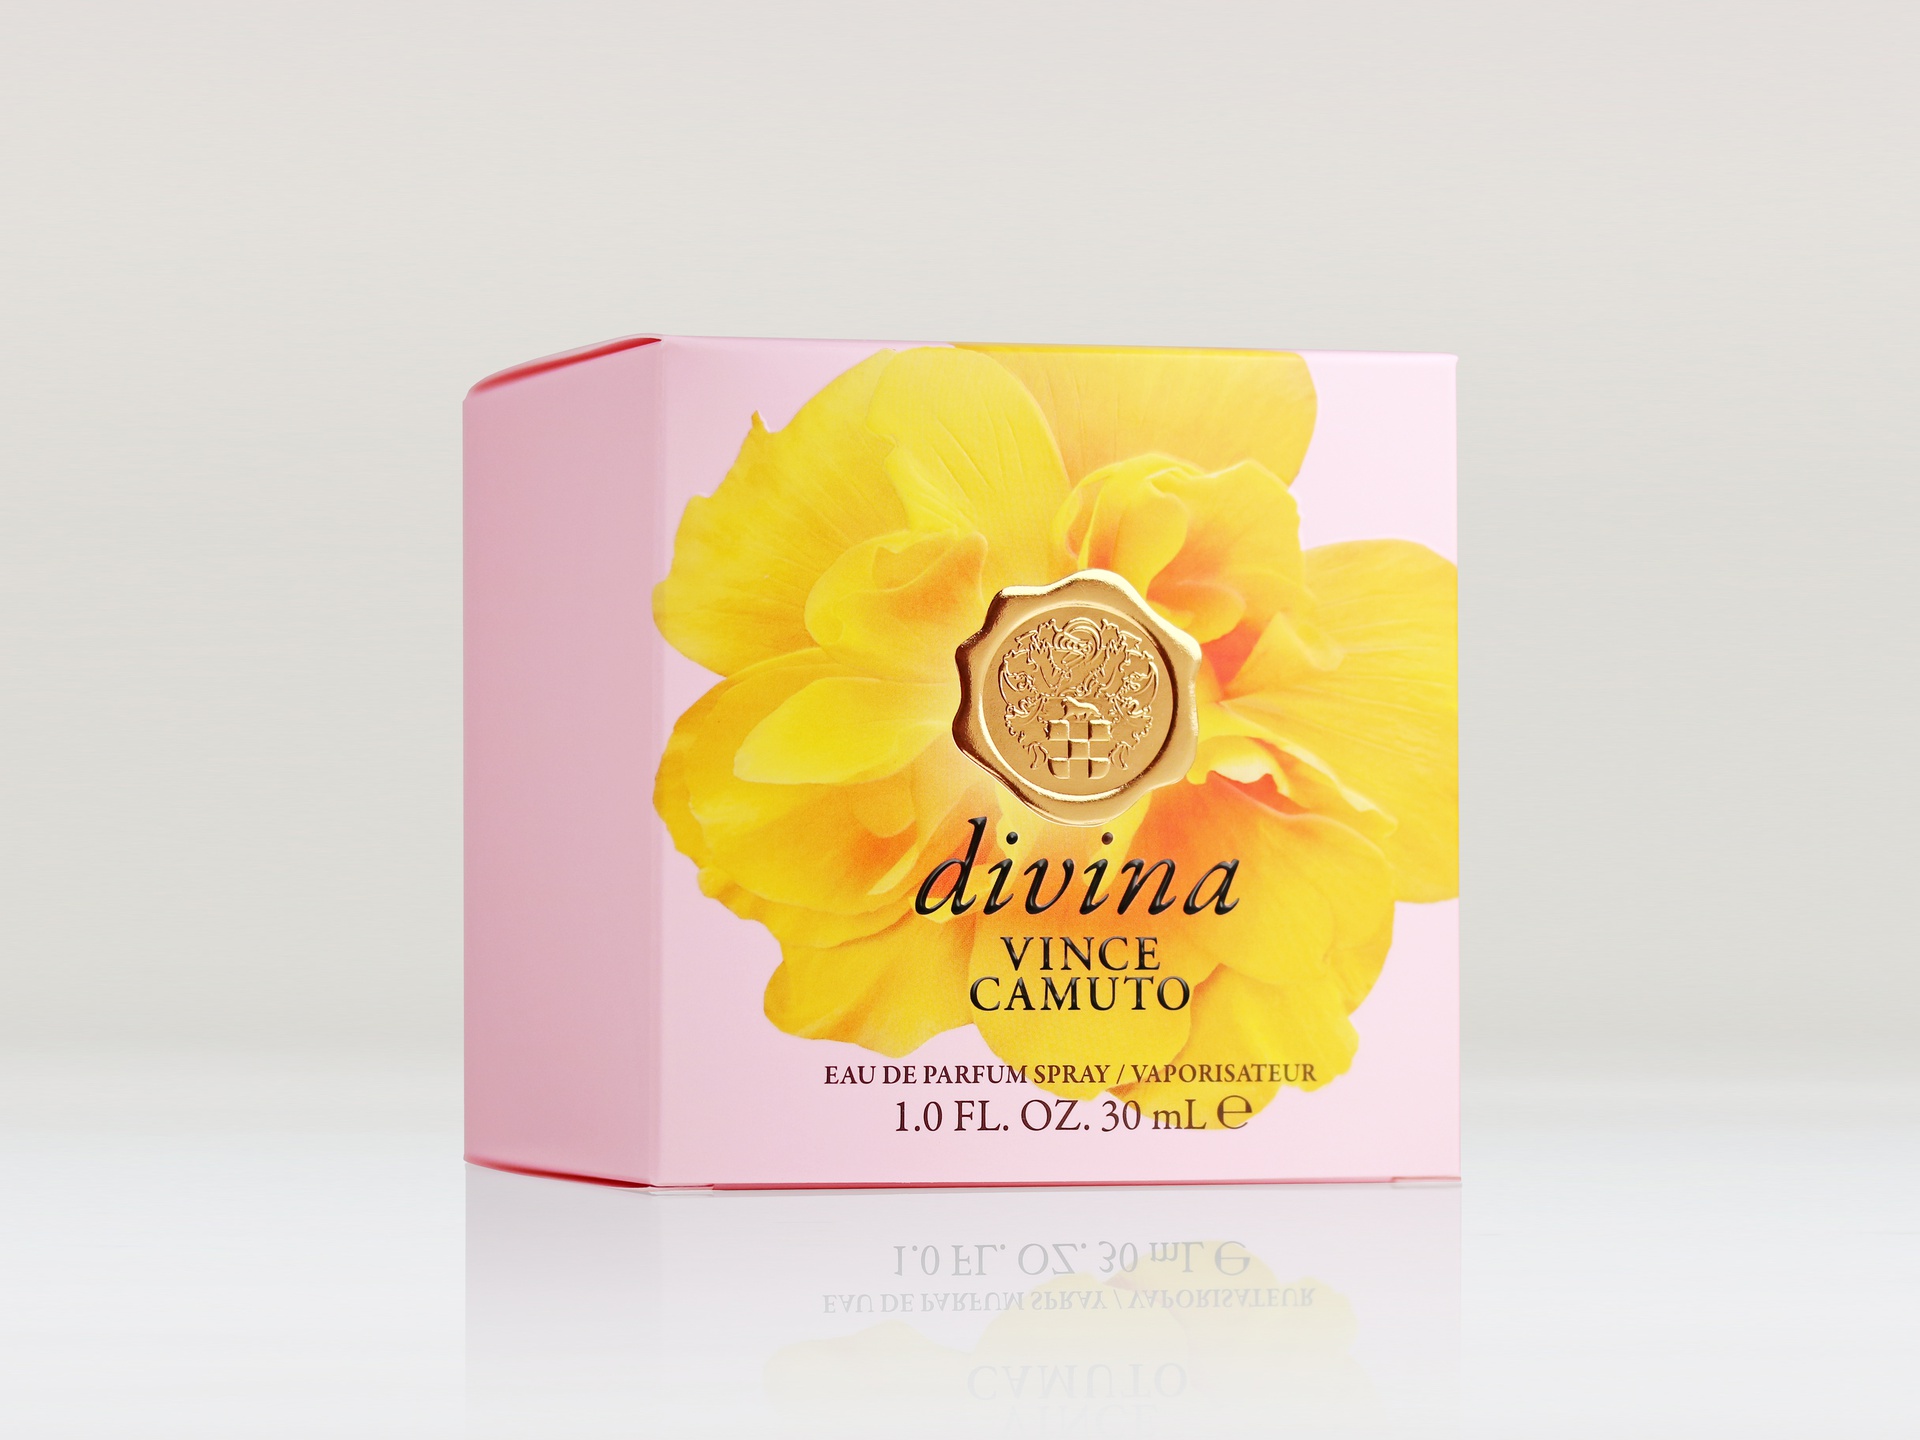 Vince Camuto Divina packaging features hot foil stamping and embossing